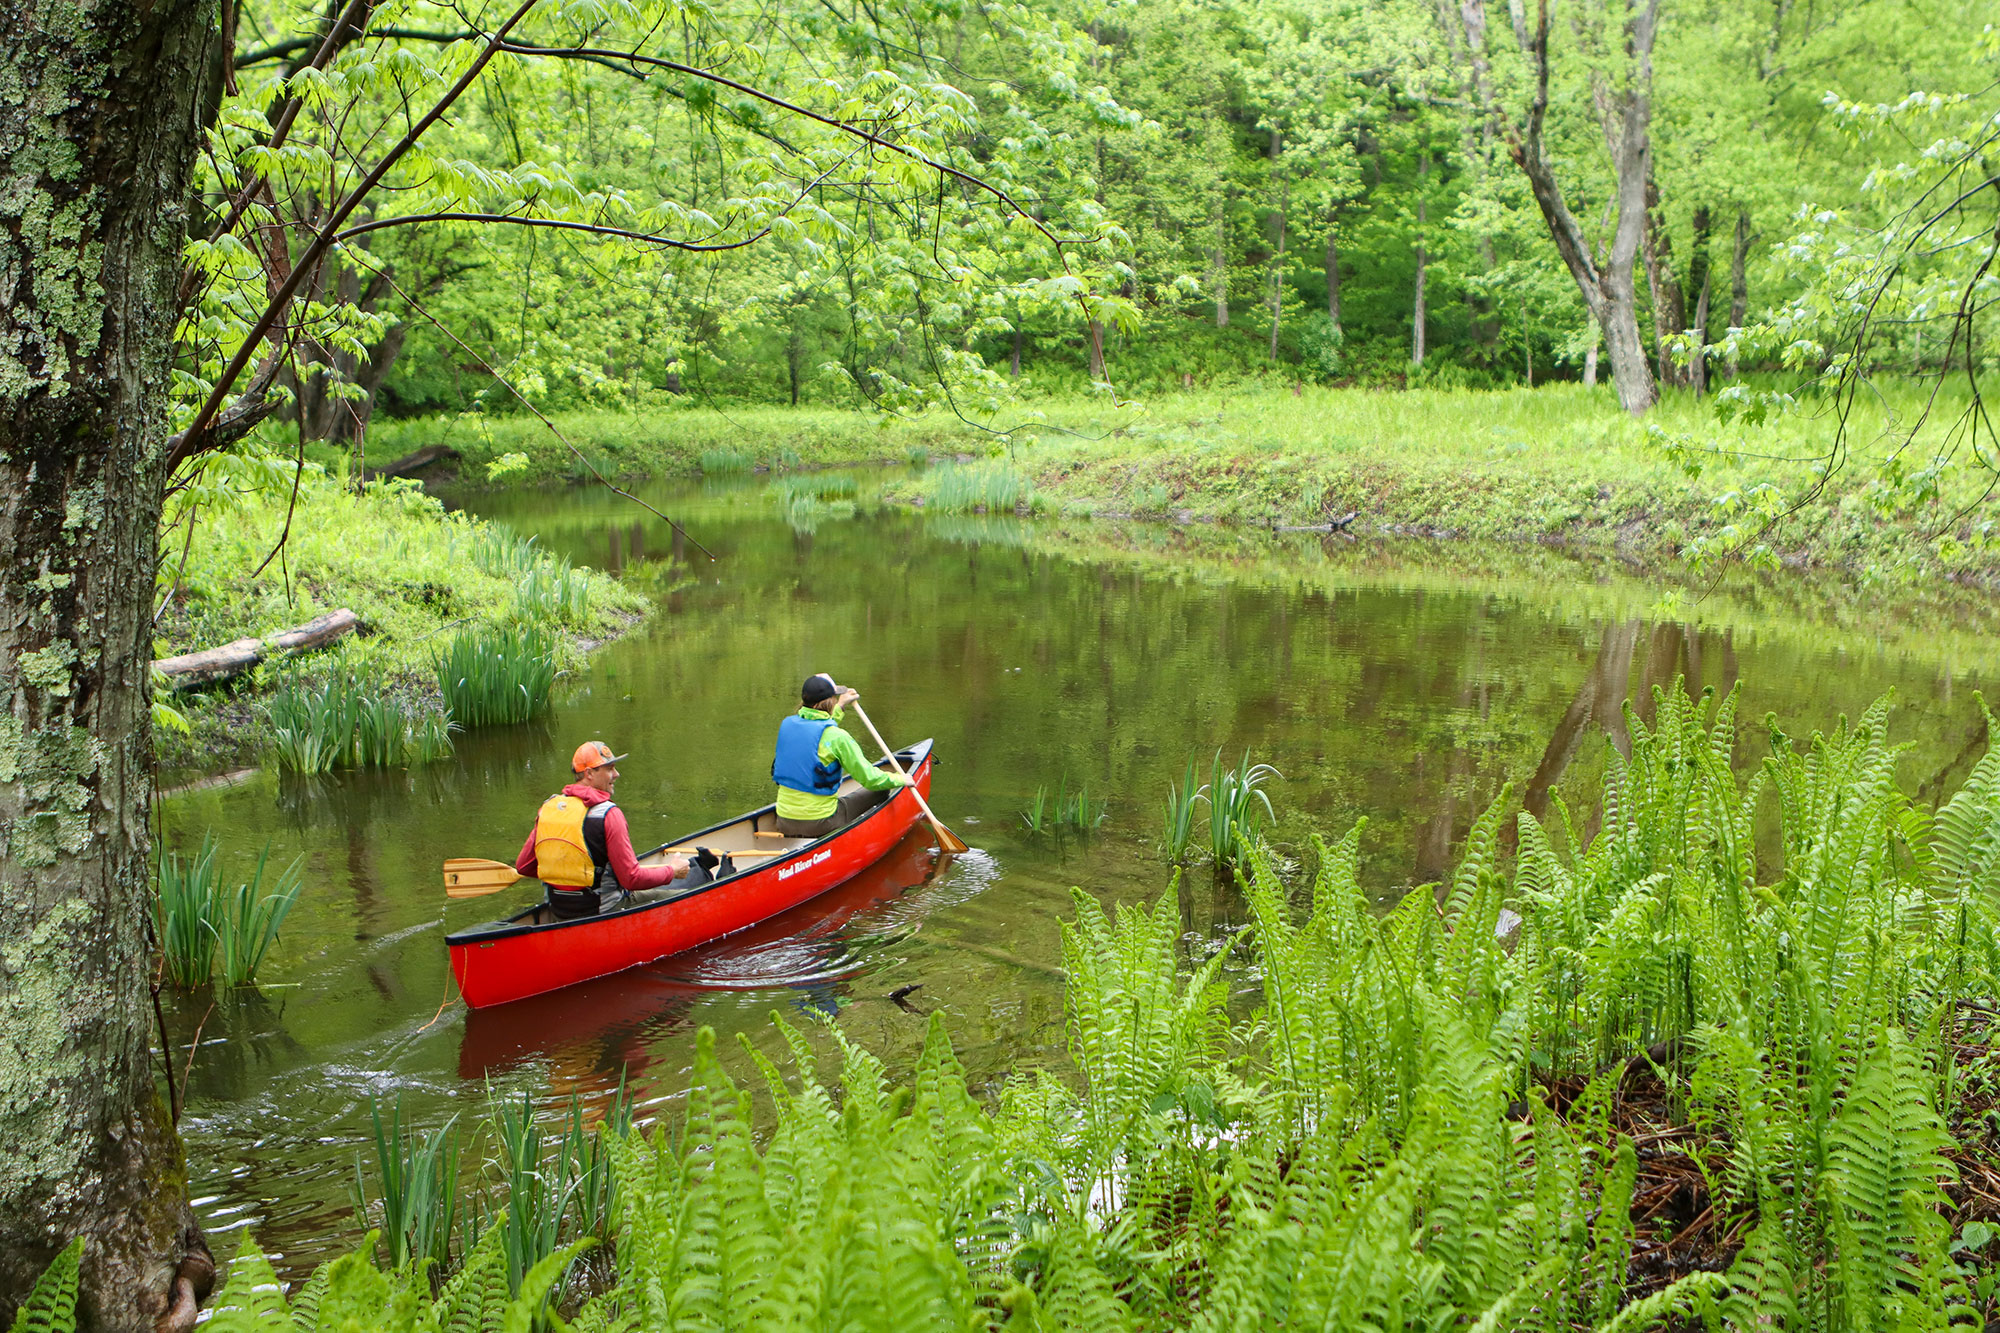 Two people paddling a red canoe in a green forest.